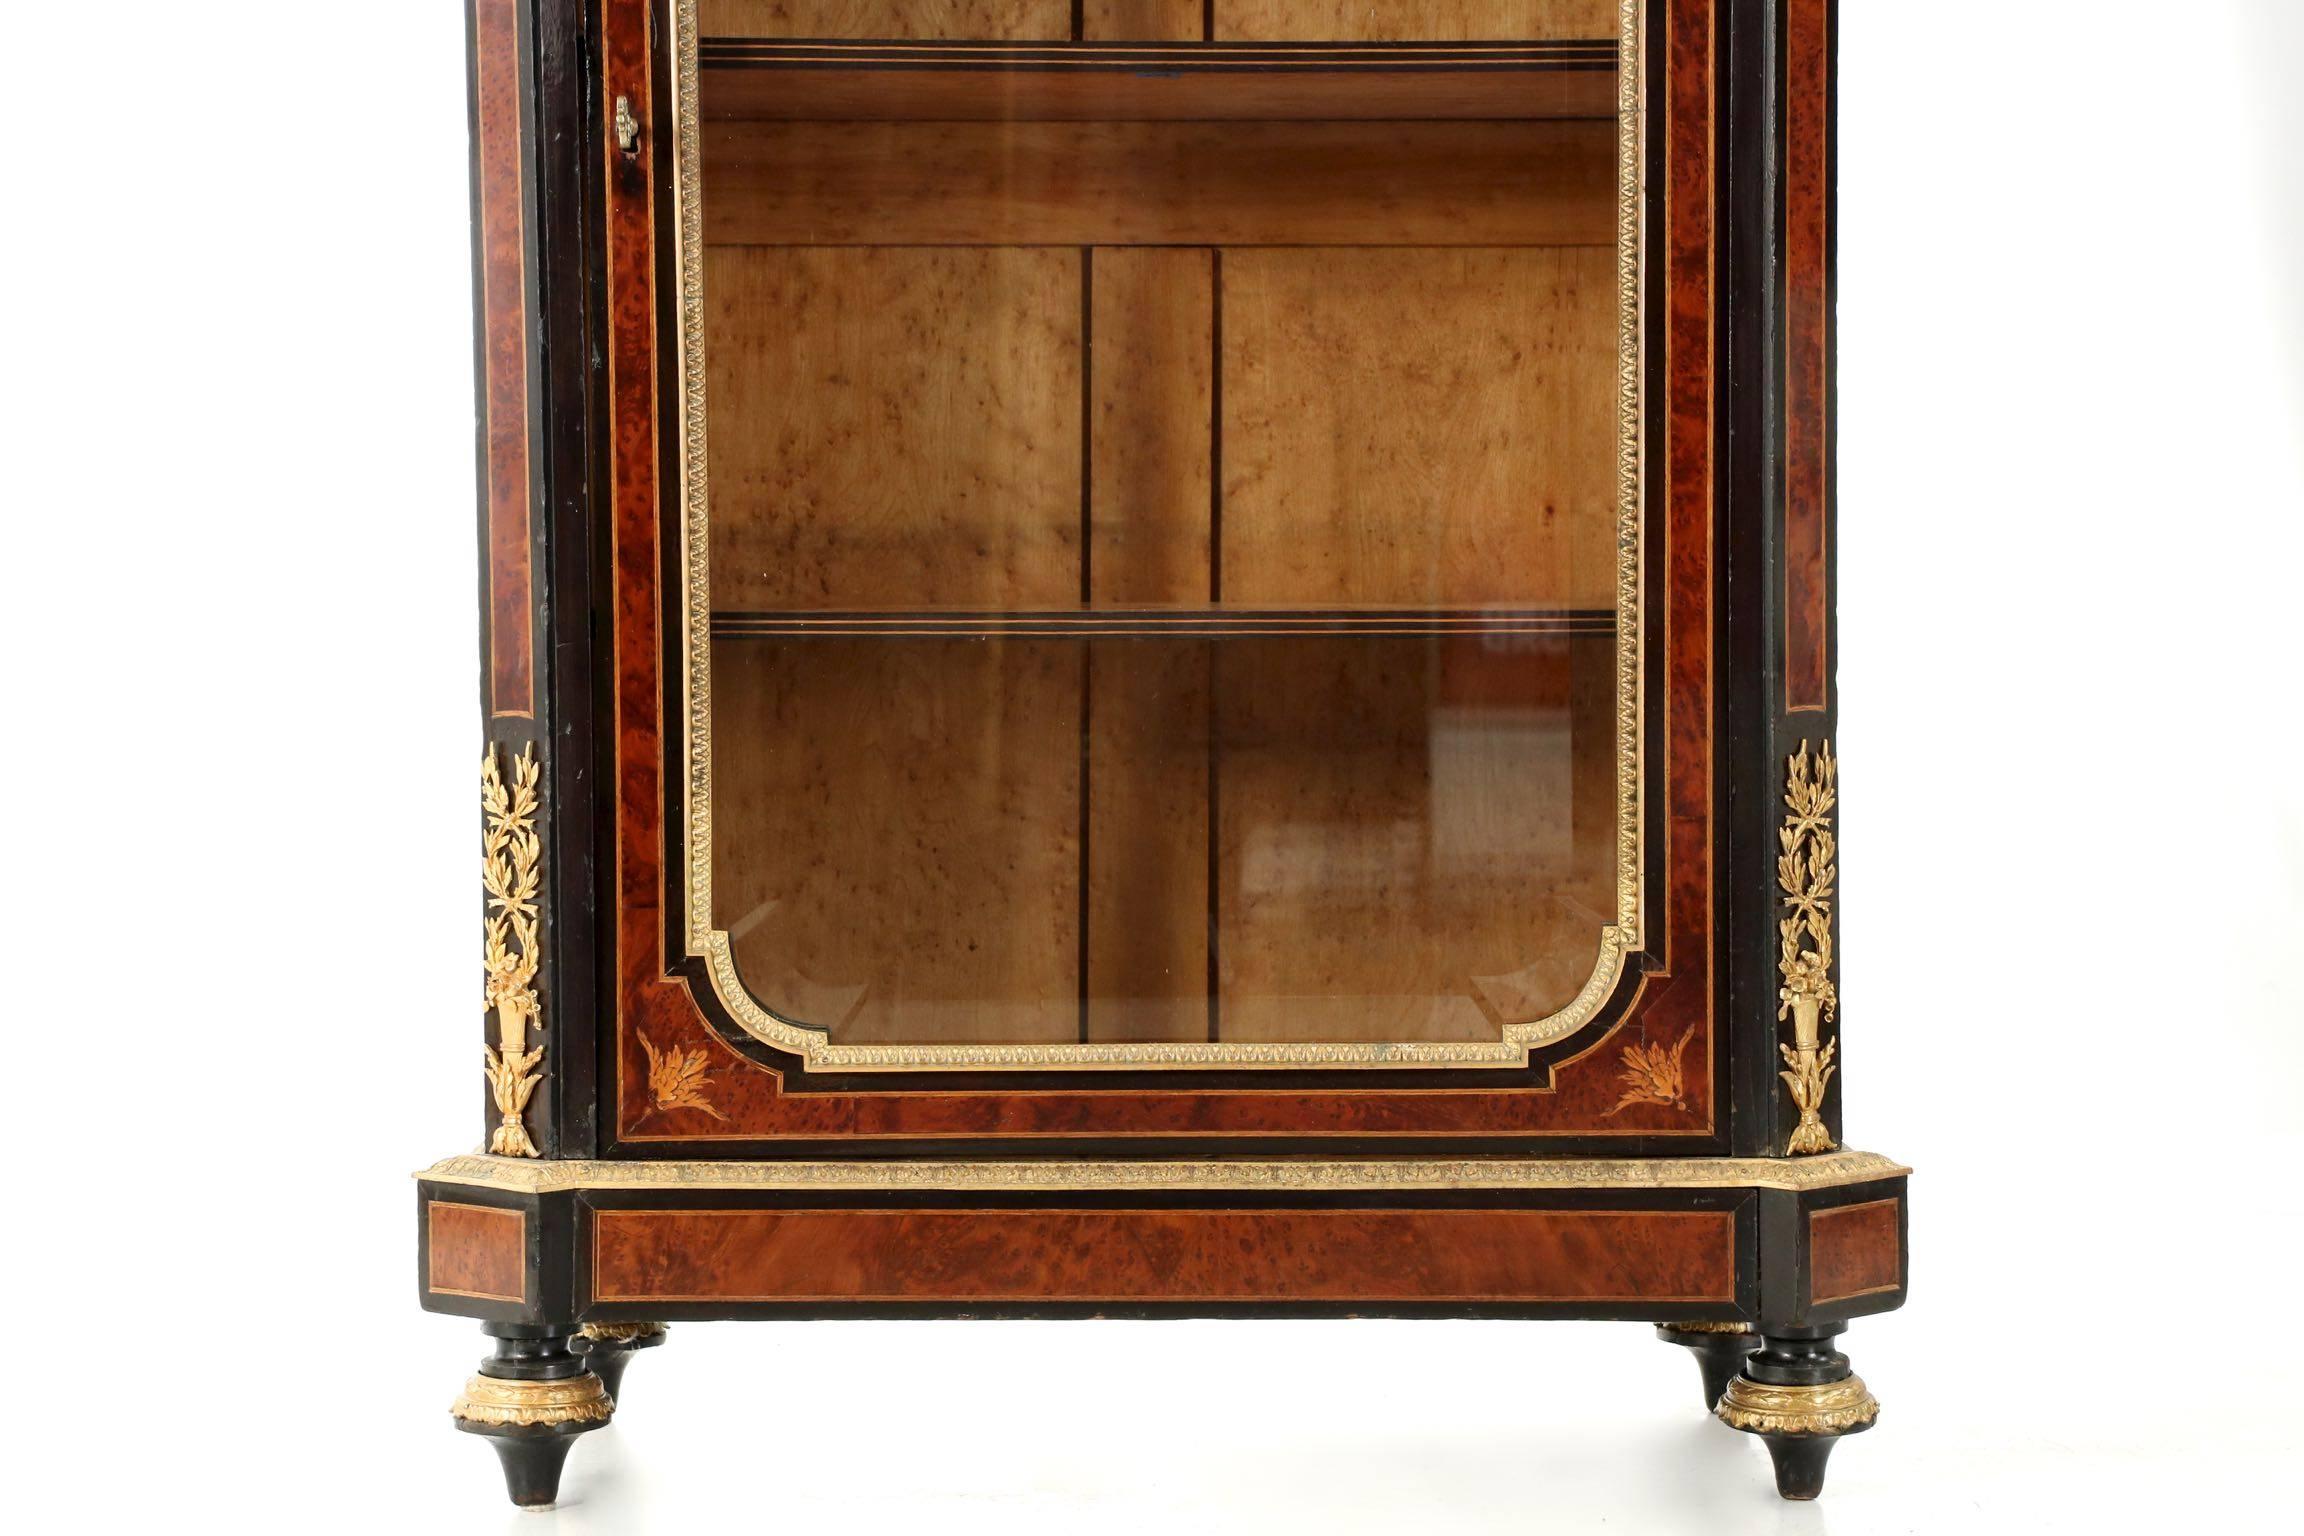 Late 19th Century French Napoleon III Marquetry Inlaid Antique Bibliotheque Bookcase Cabinet